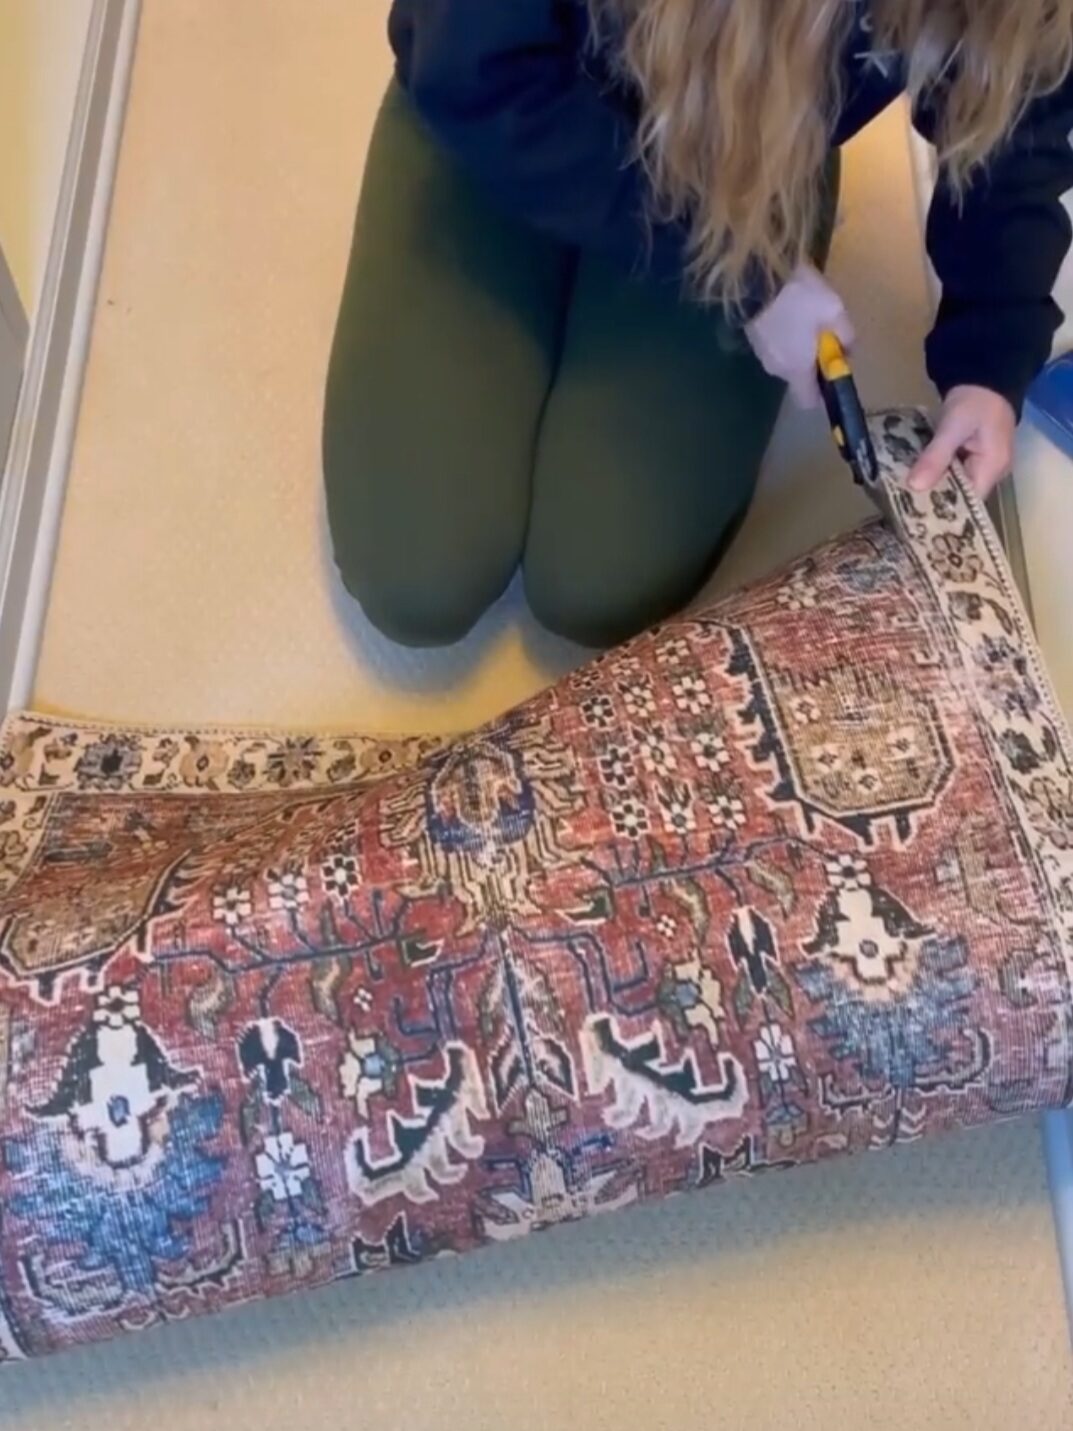 Women trimming the edges of a rug.